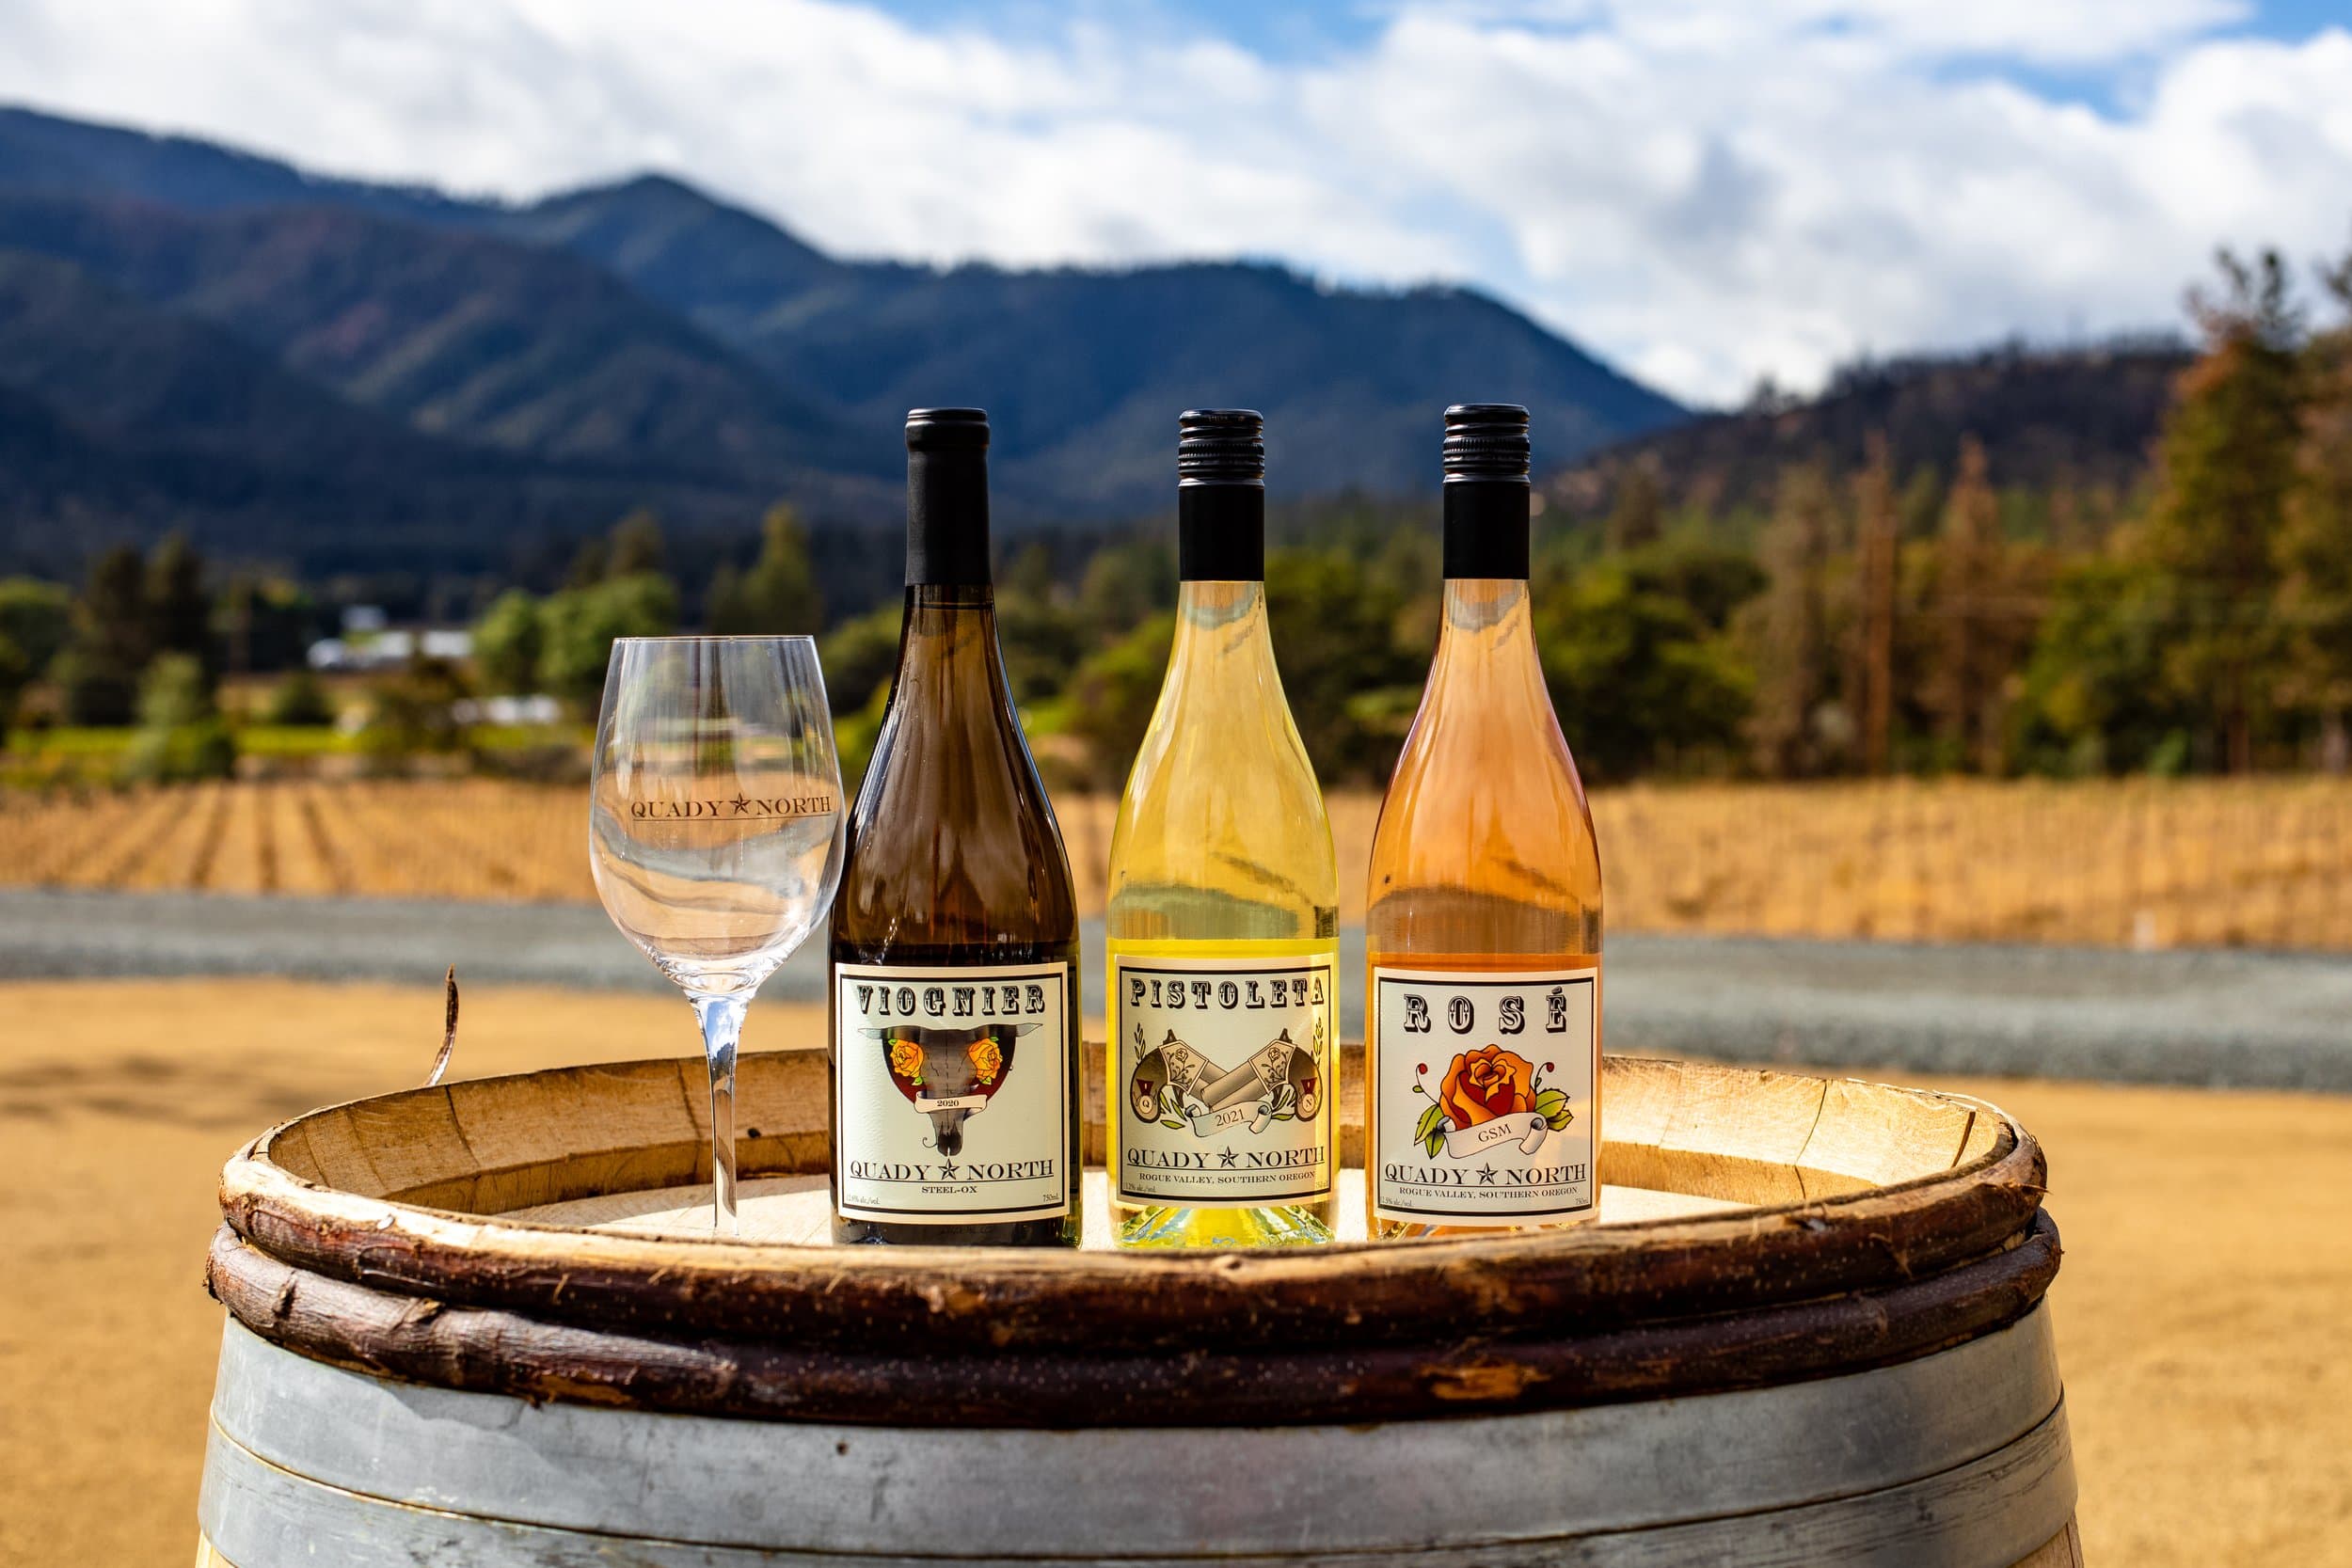 Rogue Valley Wine Country is one of the hottest up-and-coming wine regions in the world with the point to prove it. Here's a roundup of wines rated 90 points plus by Wine Spectator.